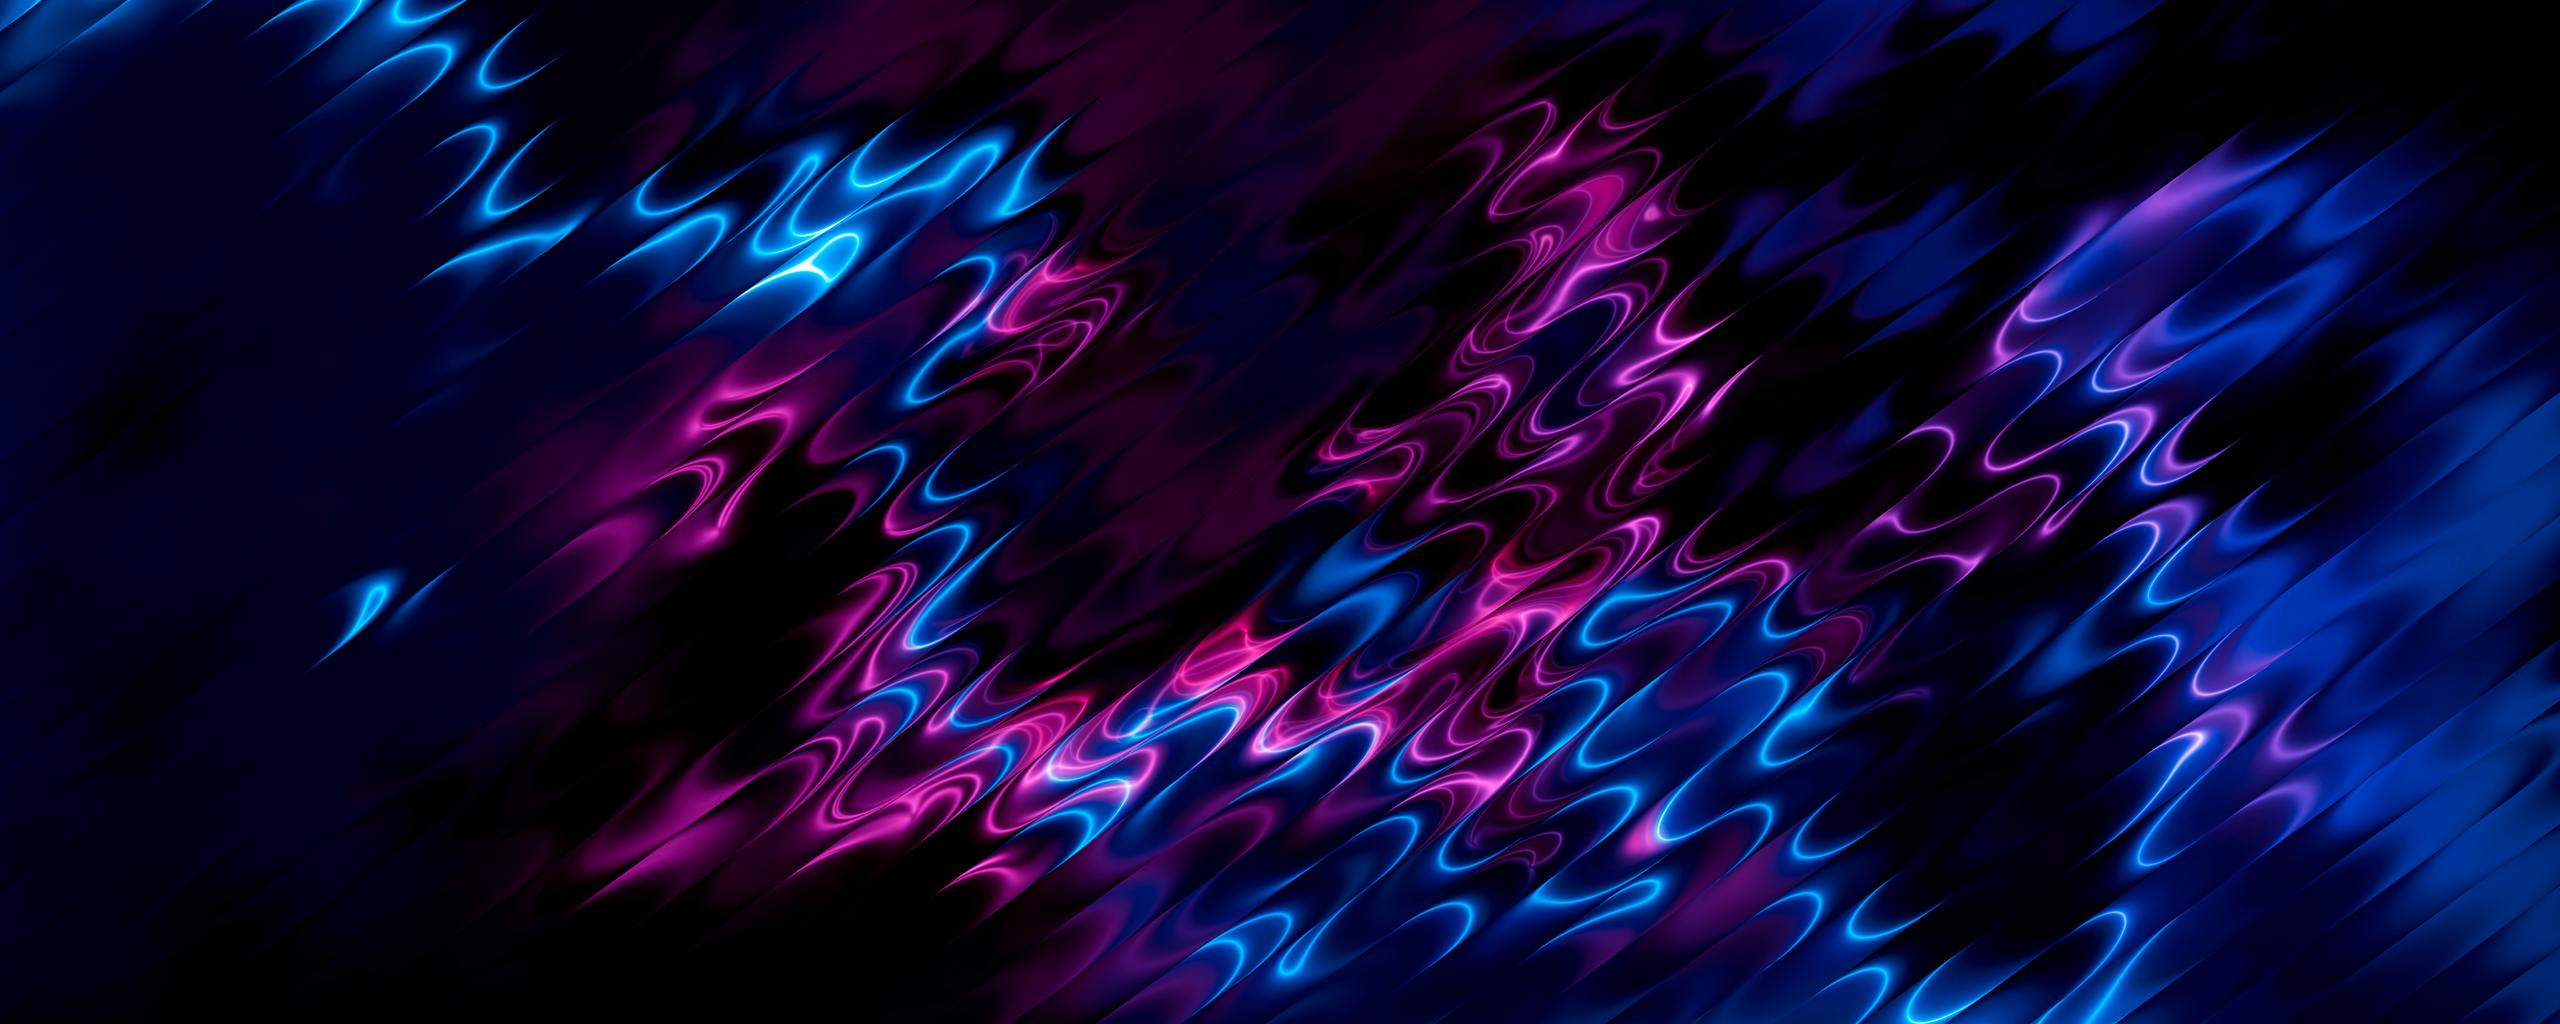 abstract-purple-lines-4k-0a.jpg